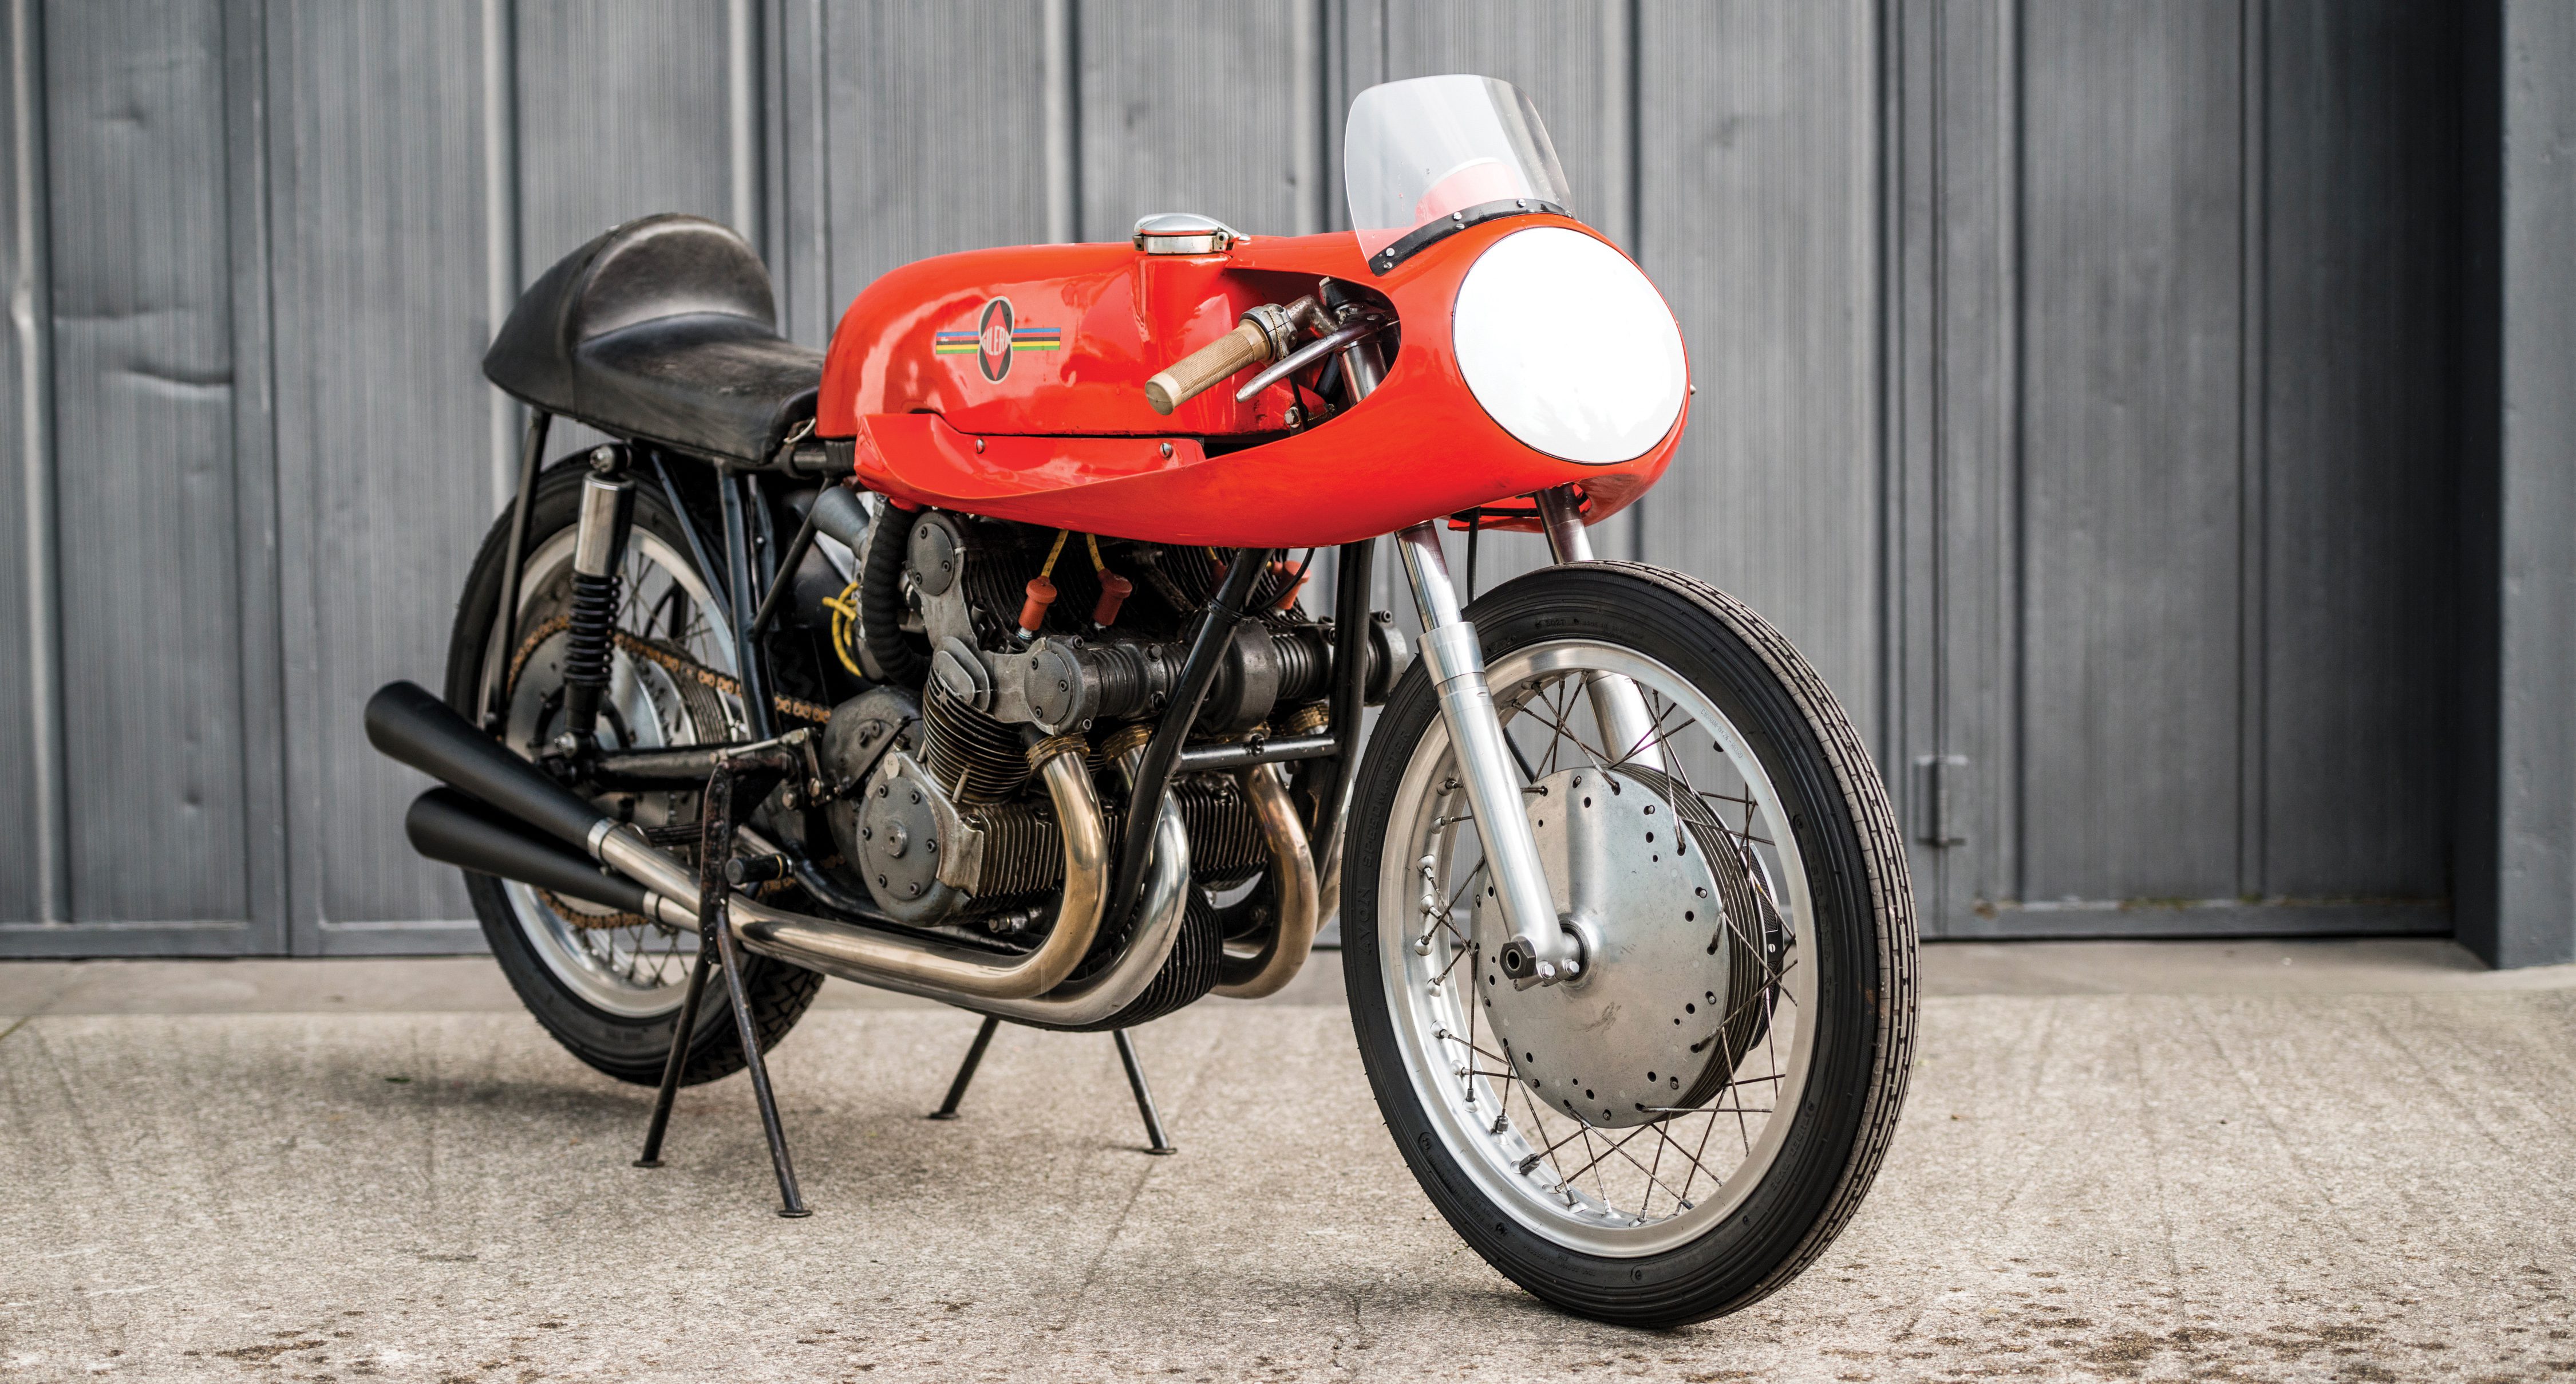 Top 10 Triumph Cafe Racer Motorcycles